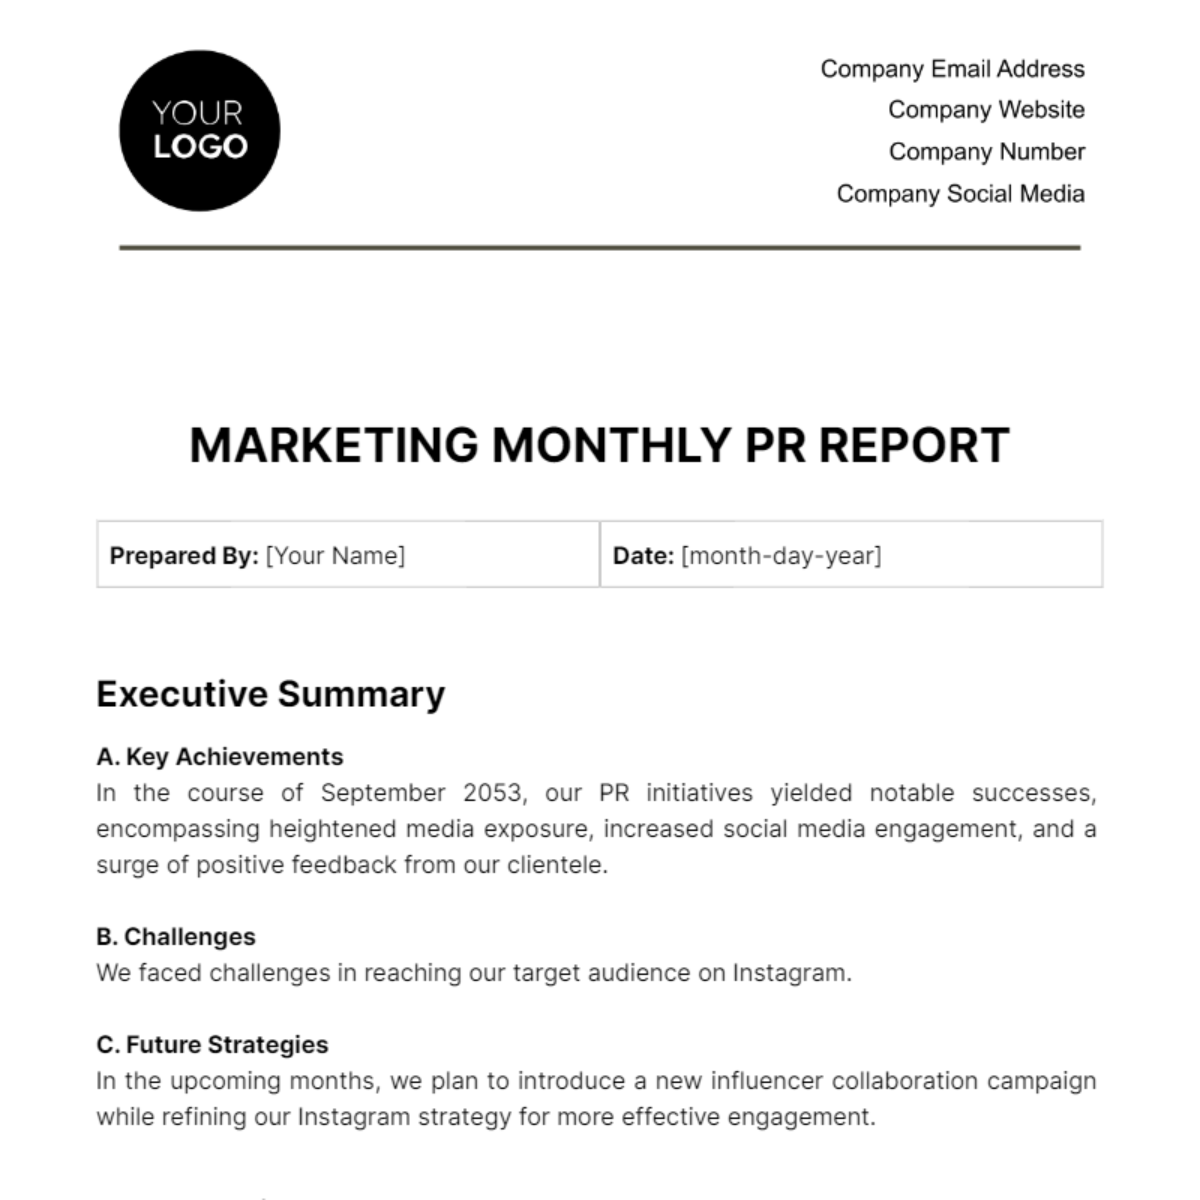 Marketing Monthly PR Report Template